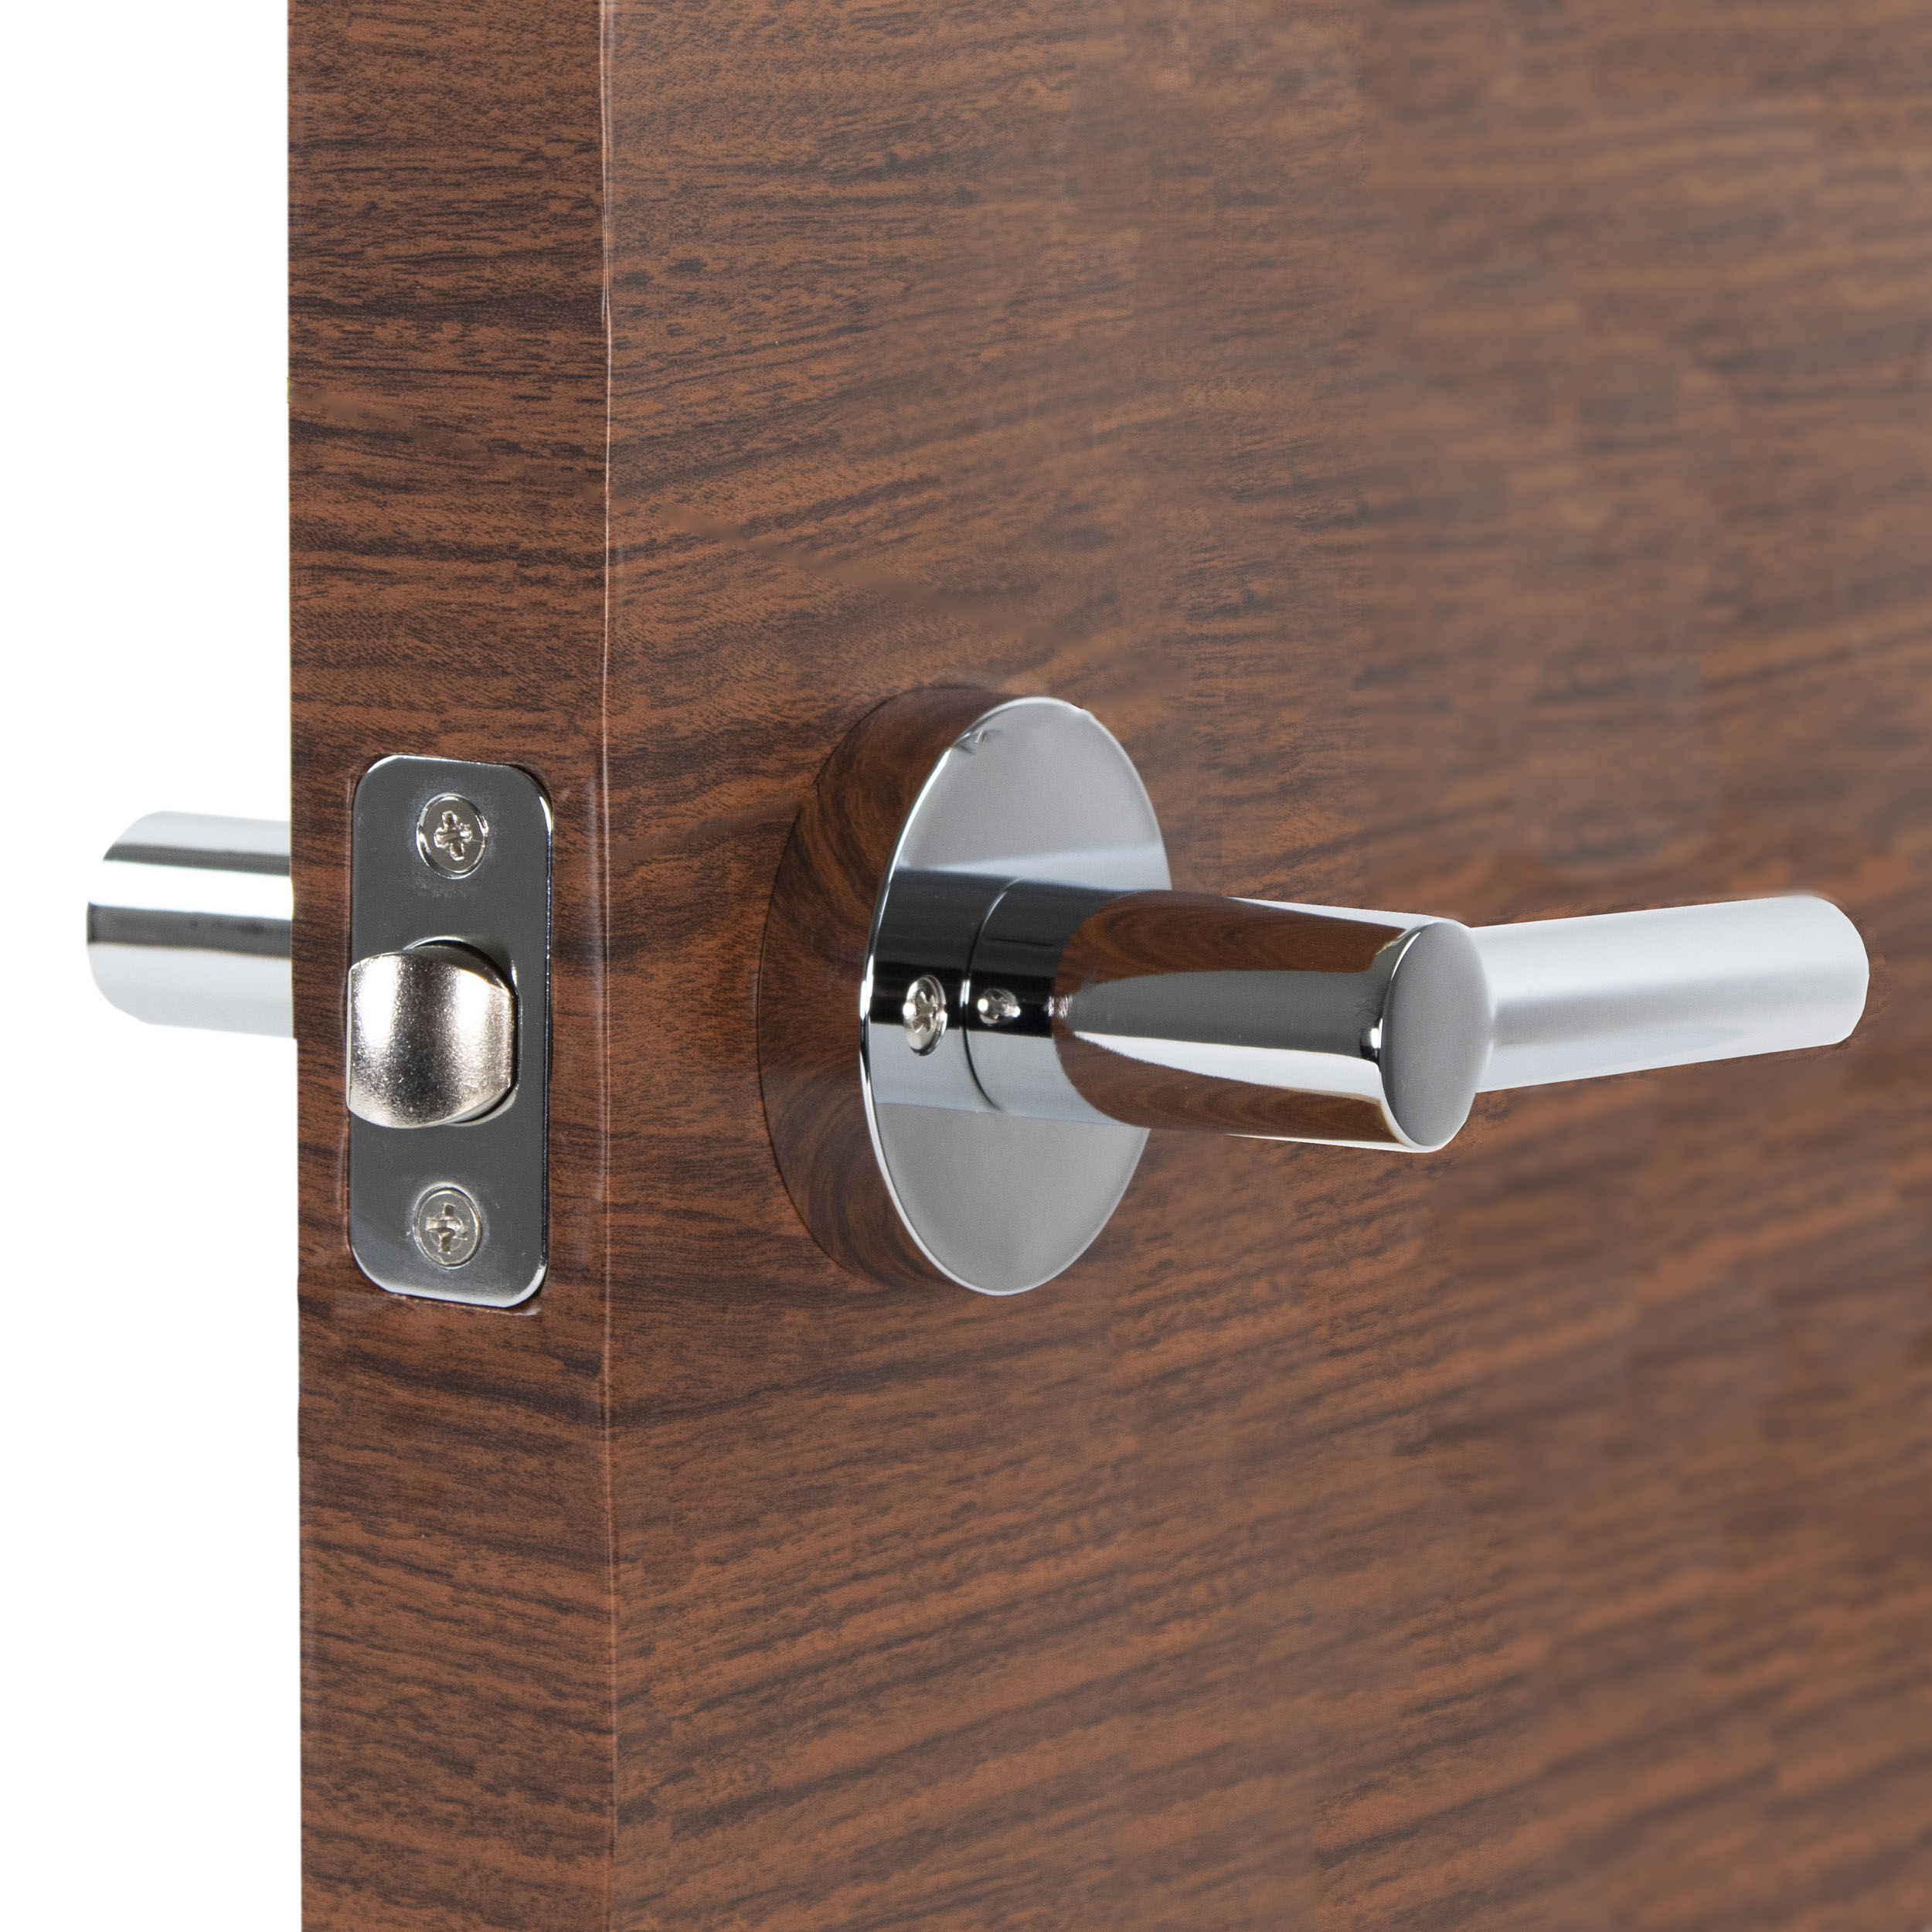 Ultra Security Windsor Unkeyed Passage Rounded Rod Door Lever - Security Unkeyed Passage Lockset, Unkeyed Passage, Fits 1-3/8" To 1-3/4" Thick Door (Polished Chrome Finish, 1 Pack) - image 5 of 12